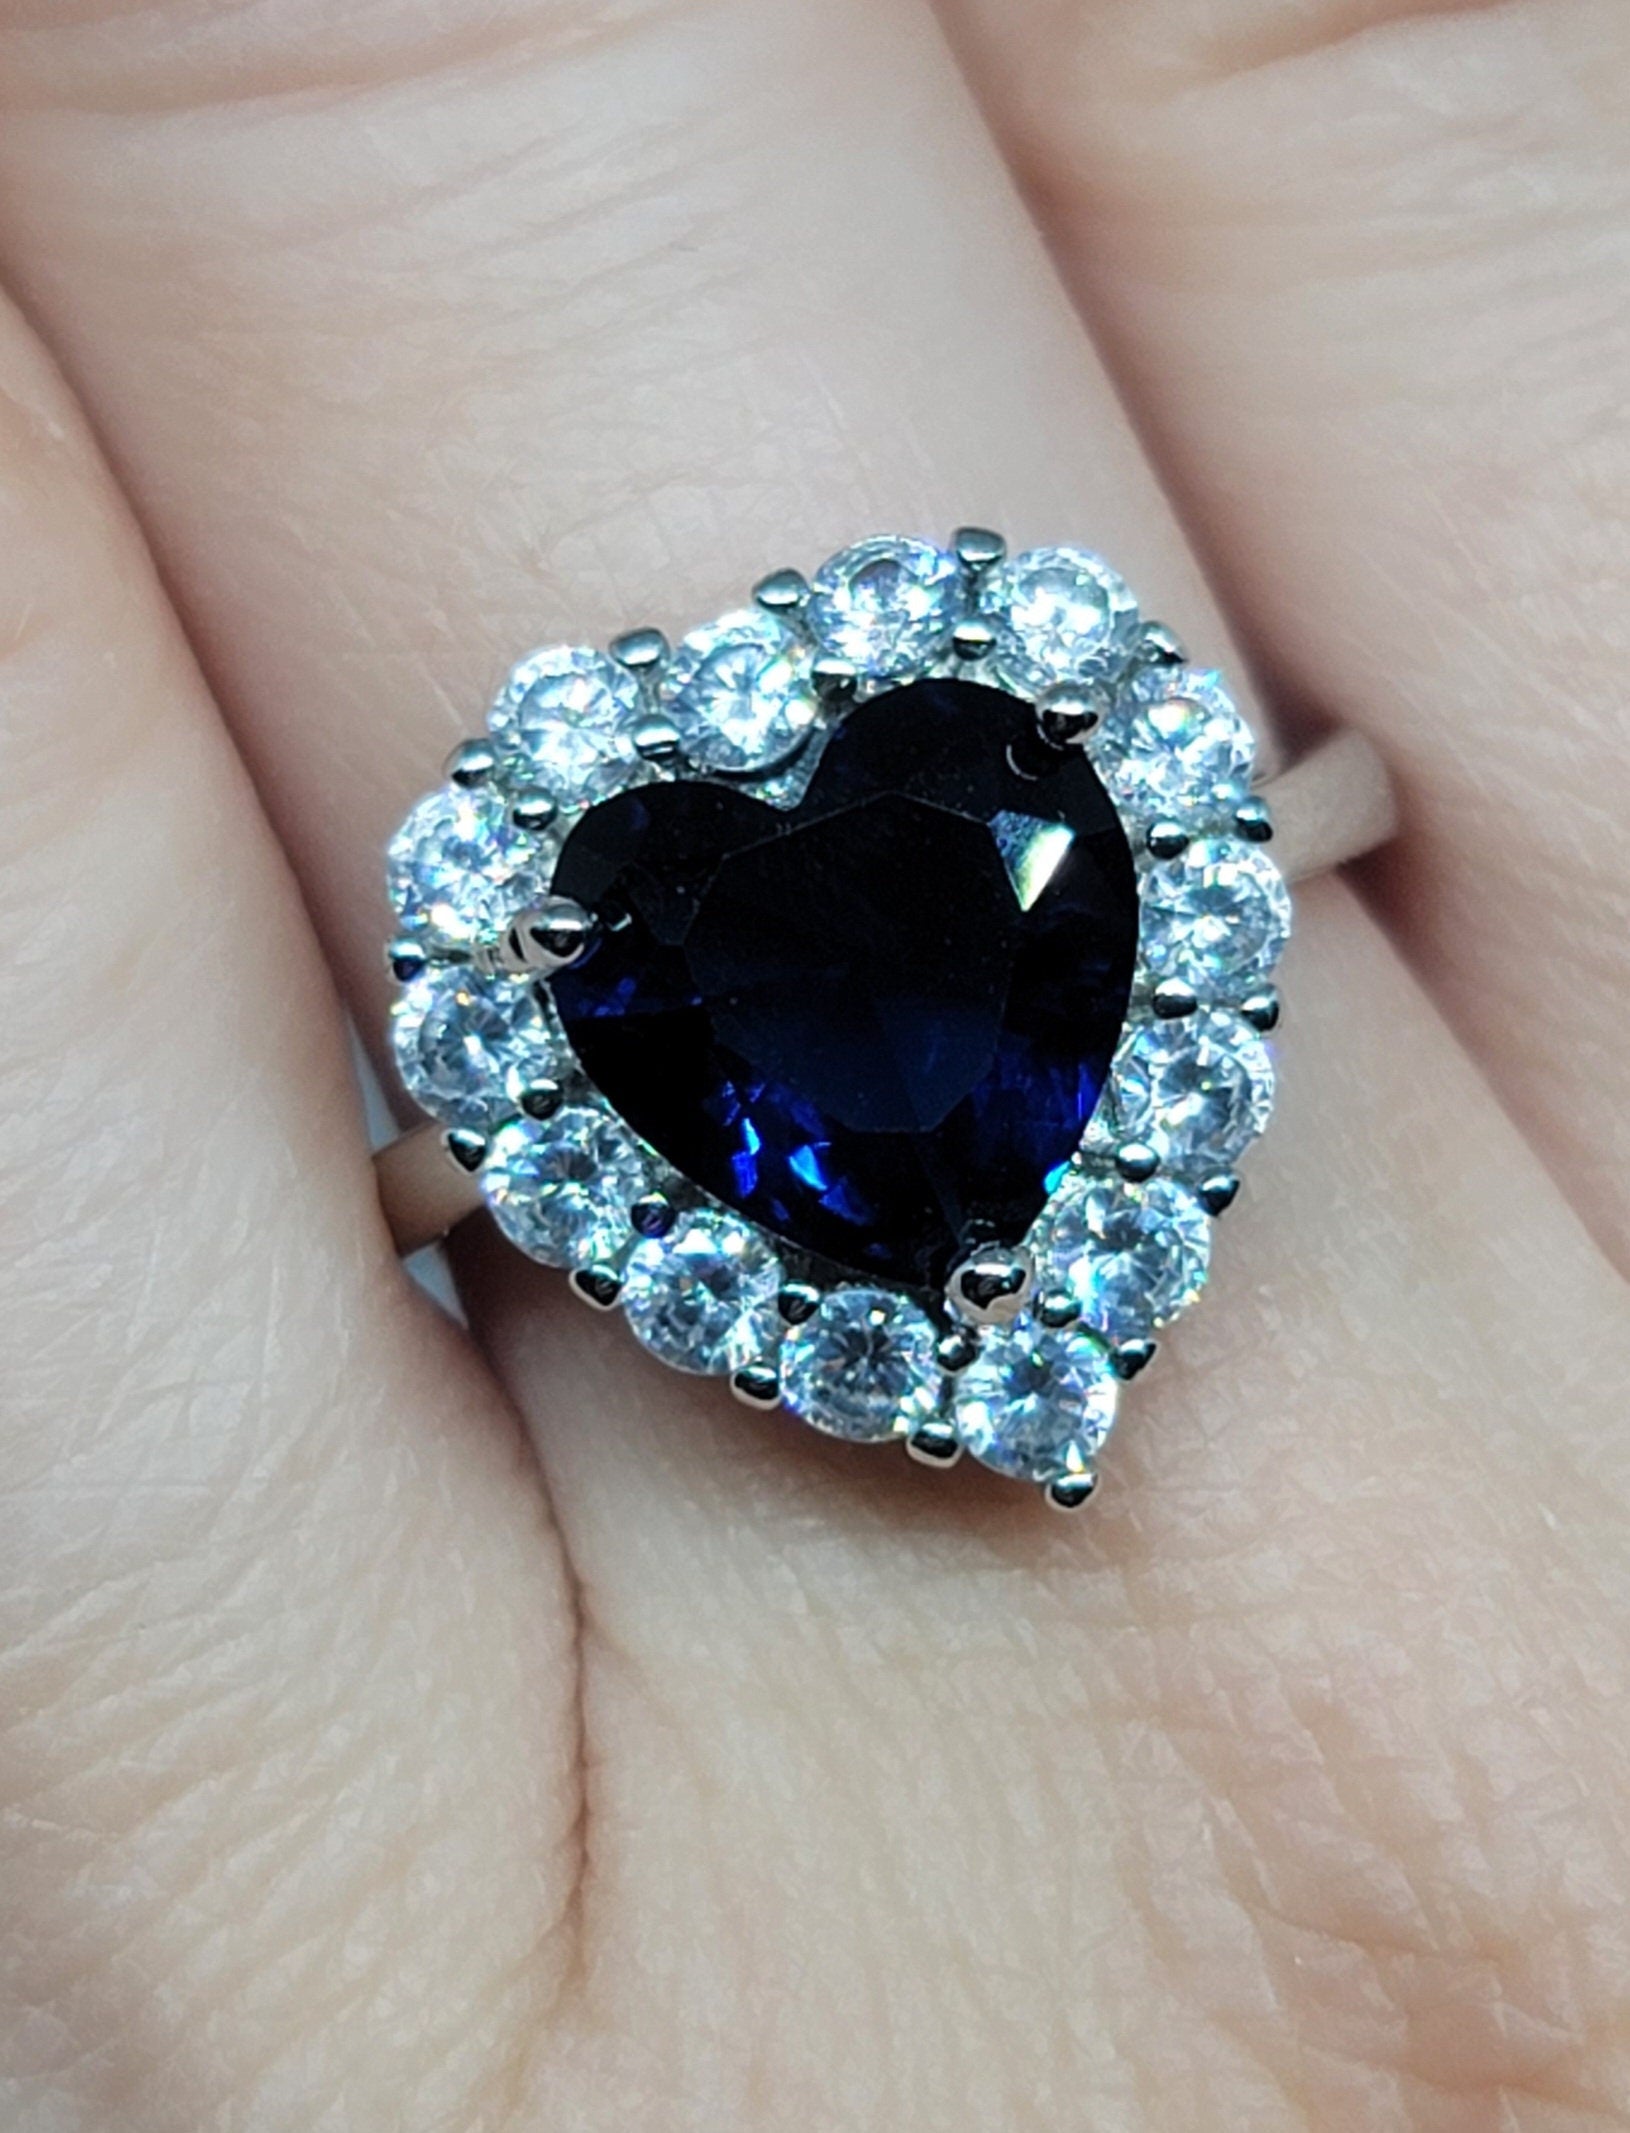 Titanic inspired blue heart of the ocean CZ silver adjustable ring Size 8